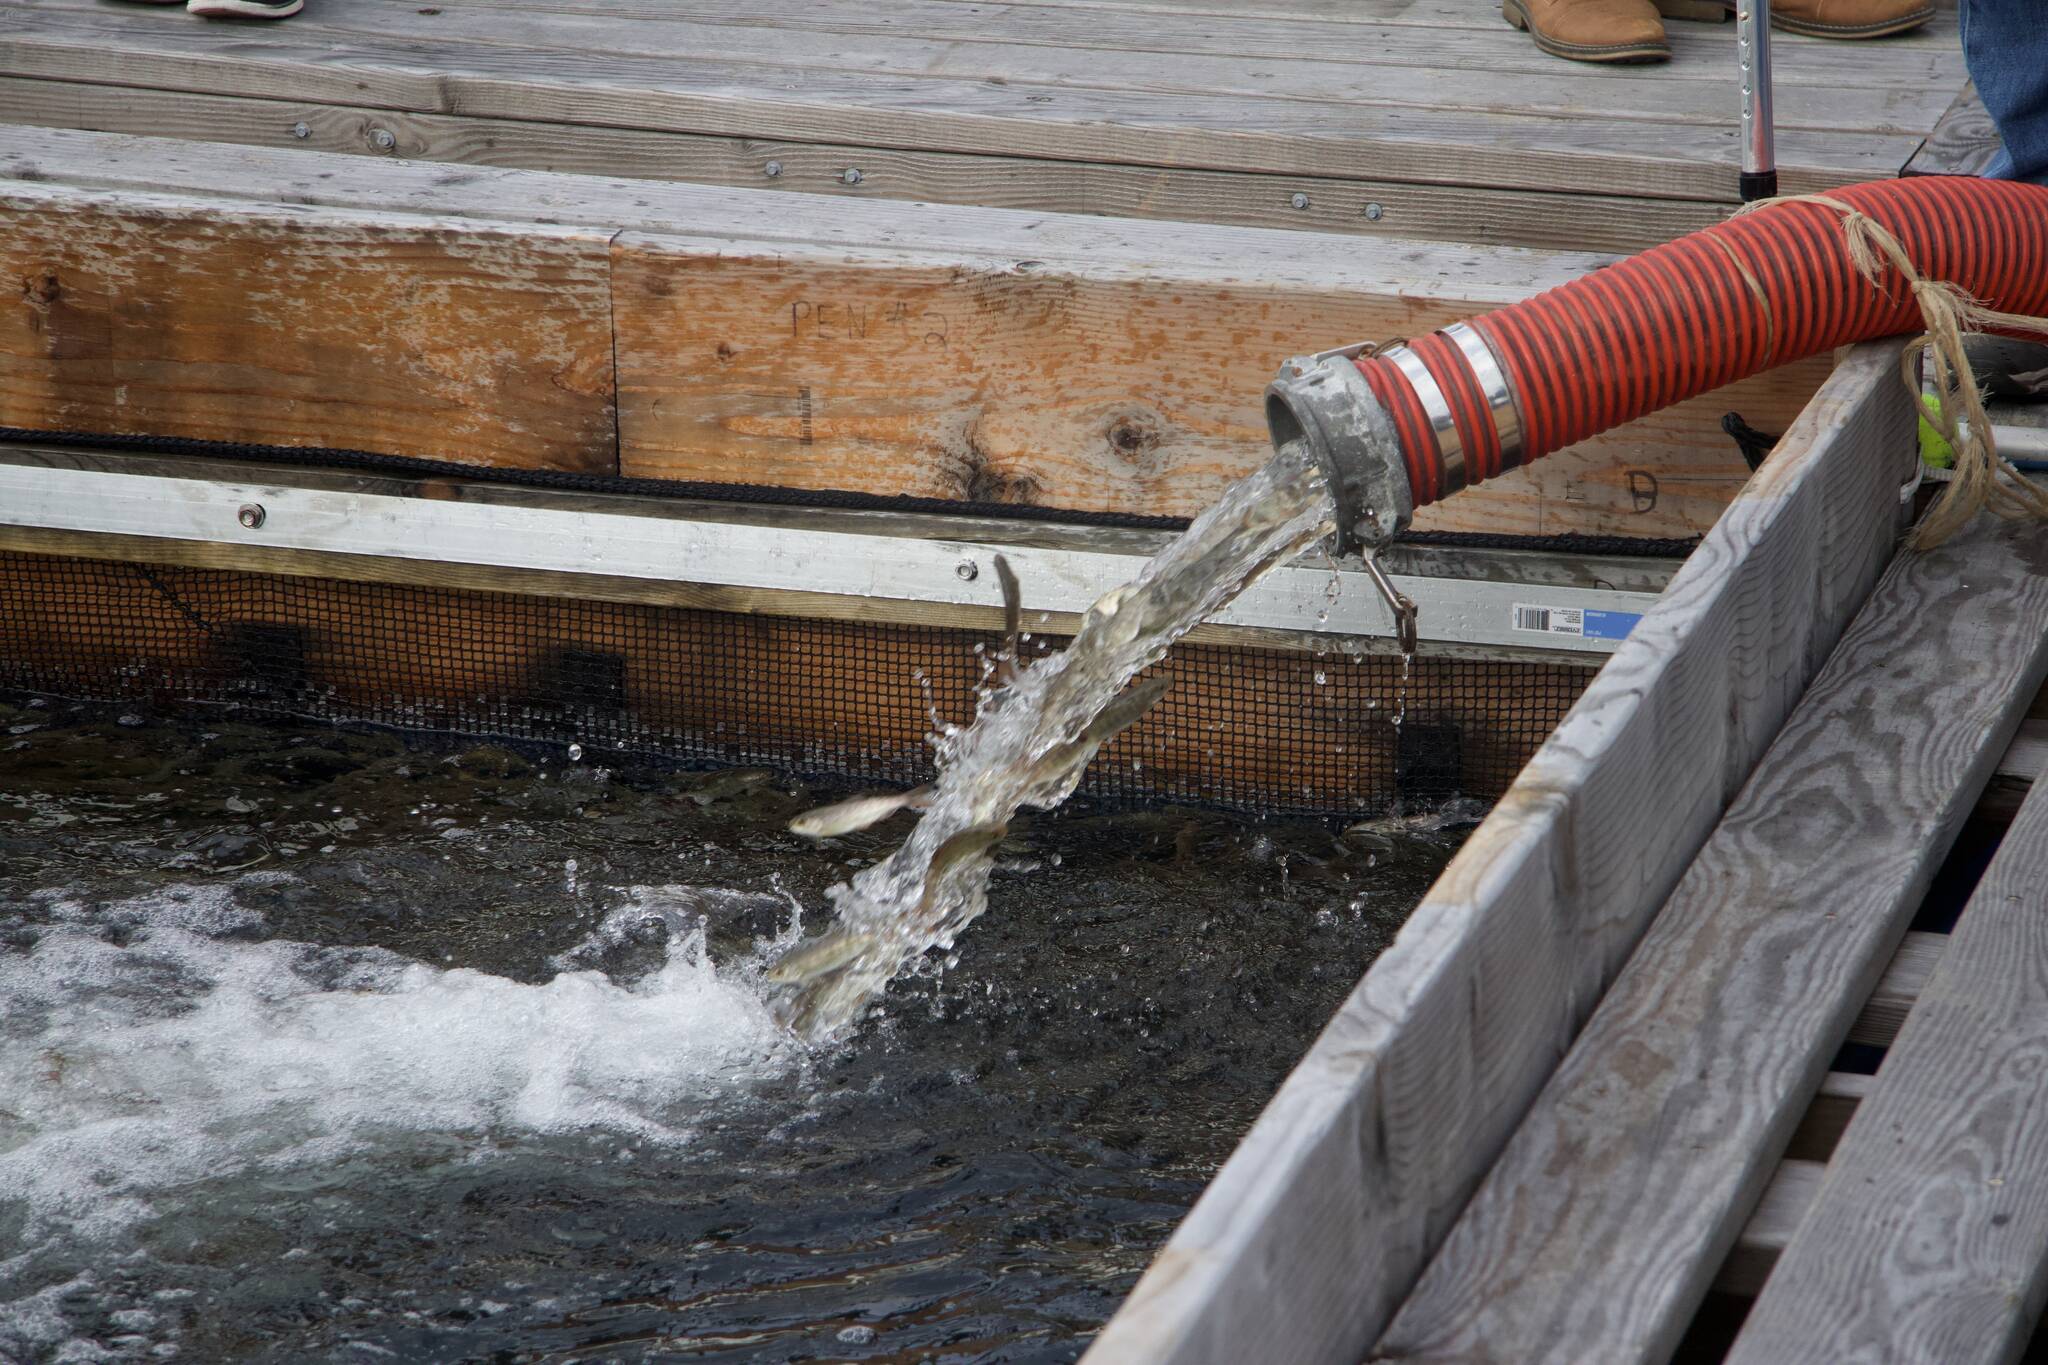 A total of 30,000 juvenile salmon were transported to the Oak Harbor marina Thursday.